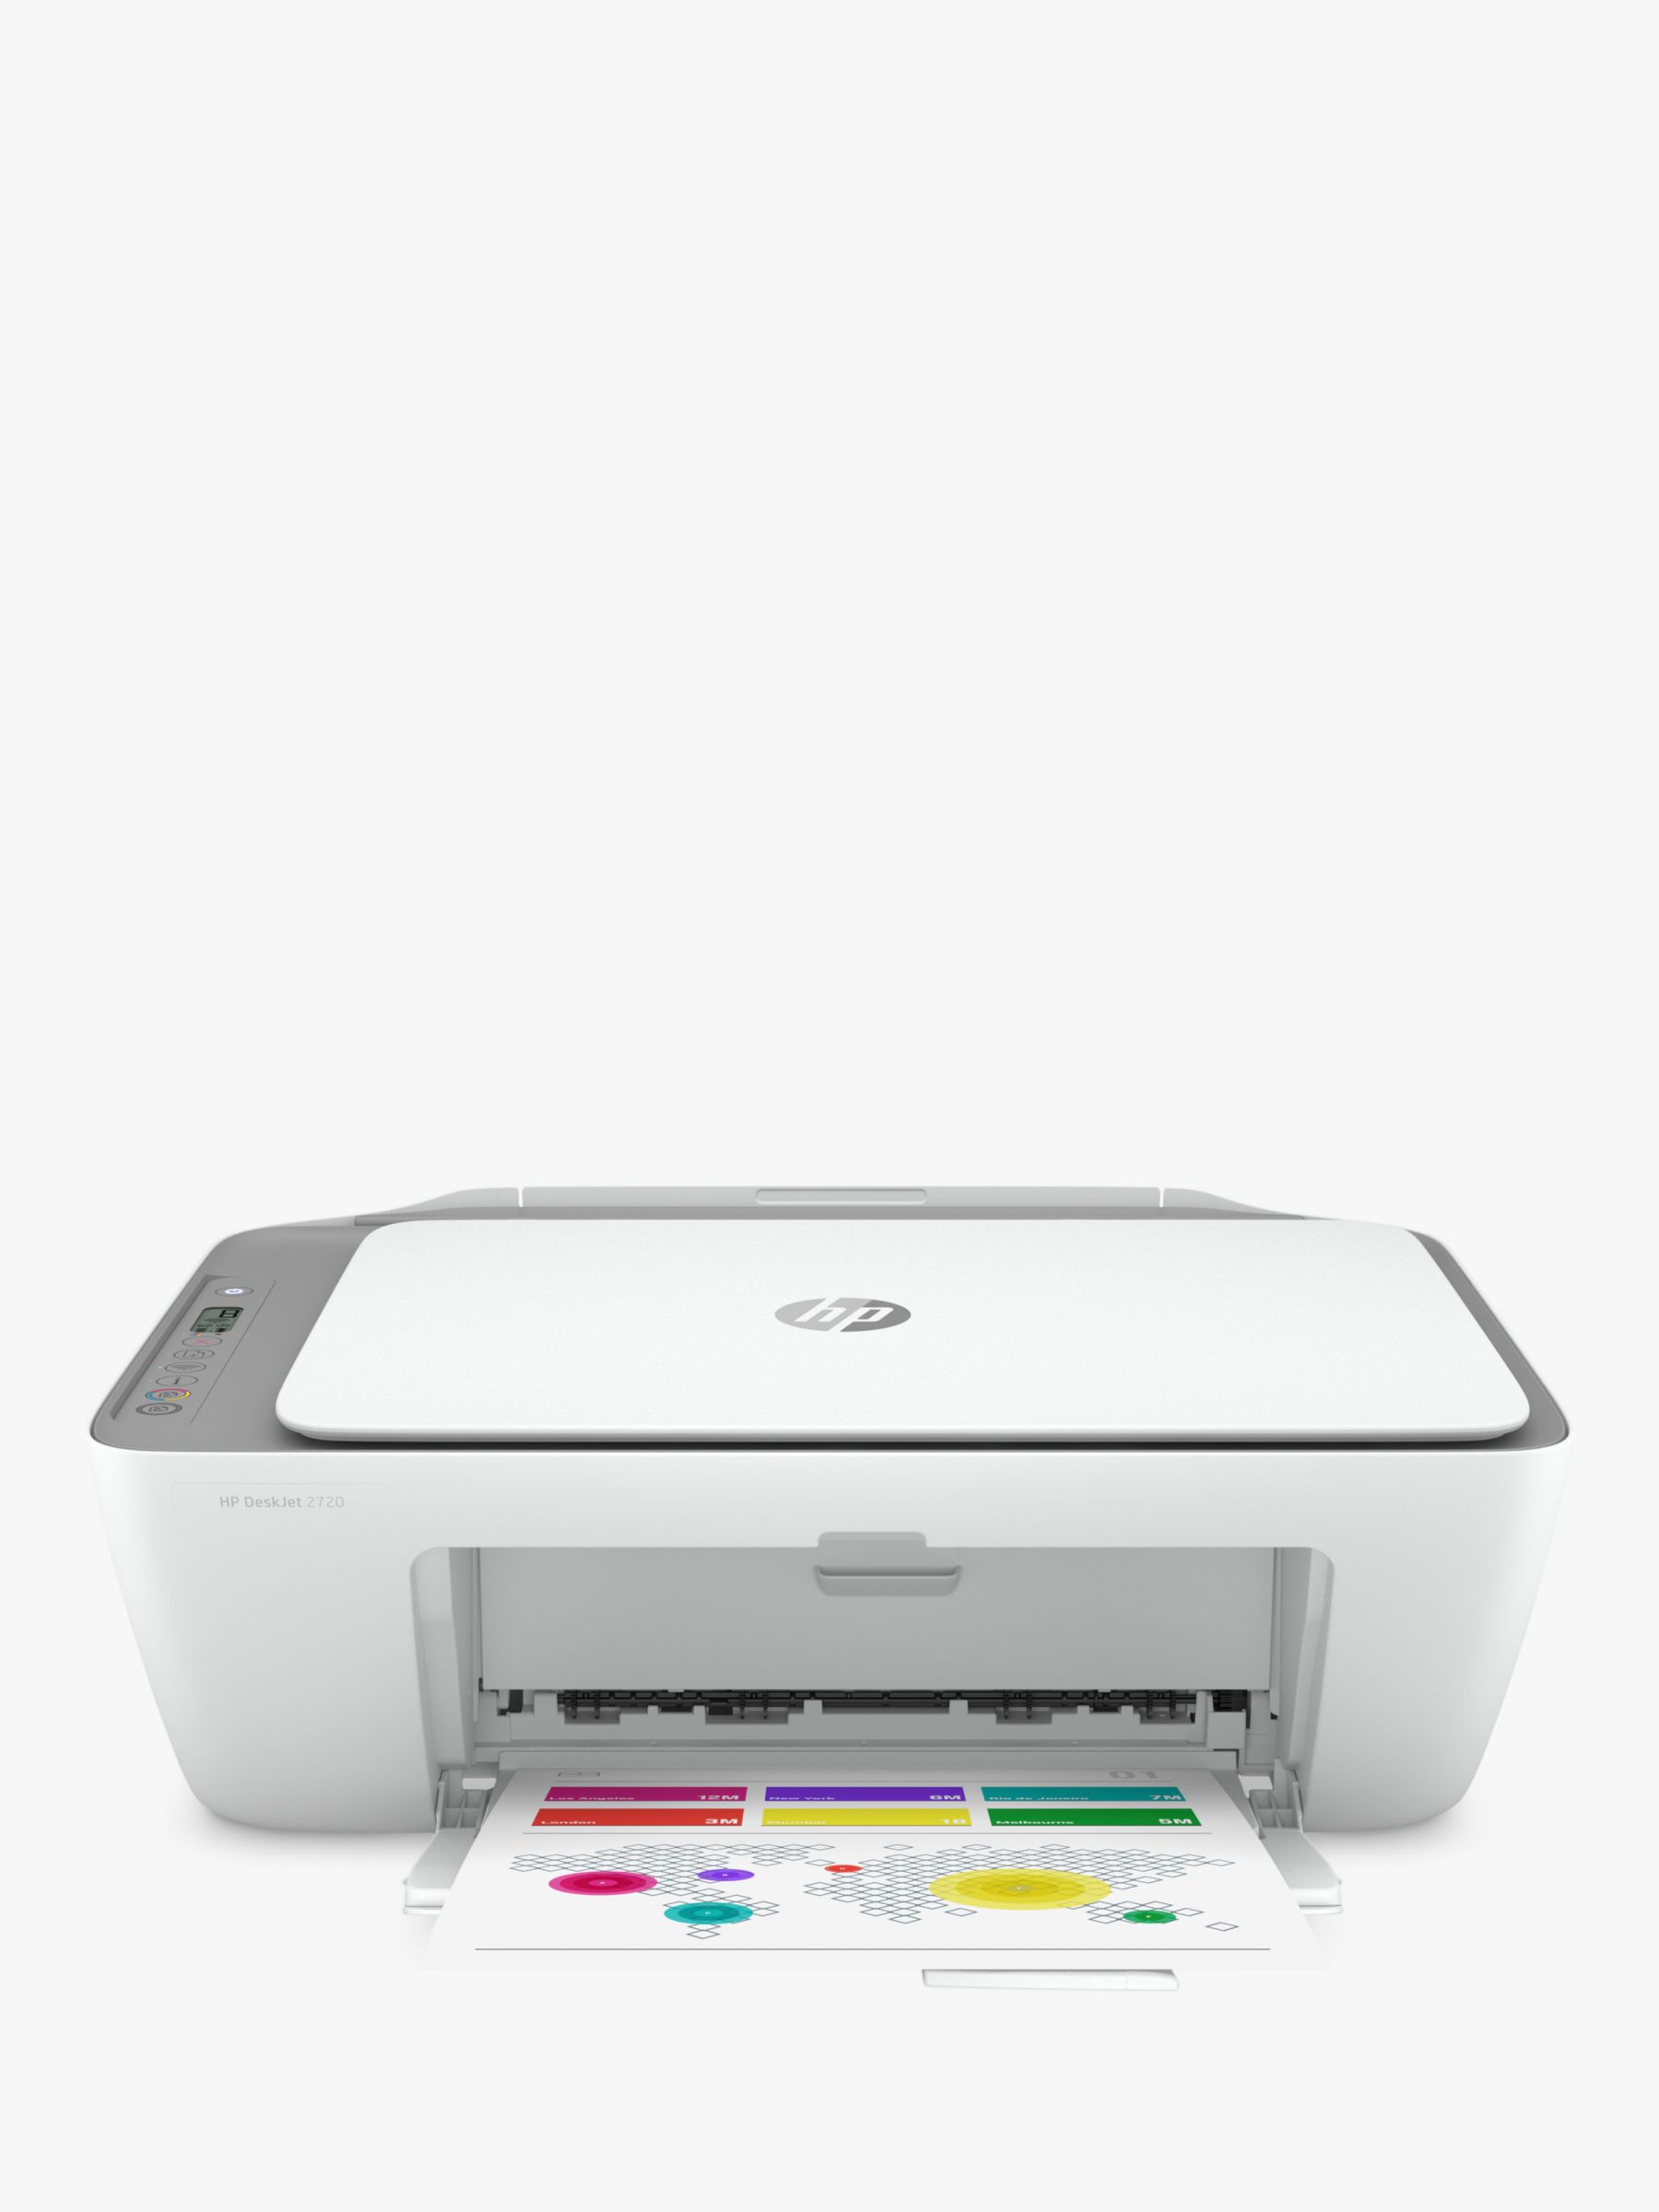 HP Deskjet 2720 All-in-One Wireless Printer, HP Instant Ink Compatible with 2 Months Trial, White & Grey